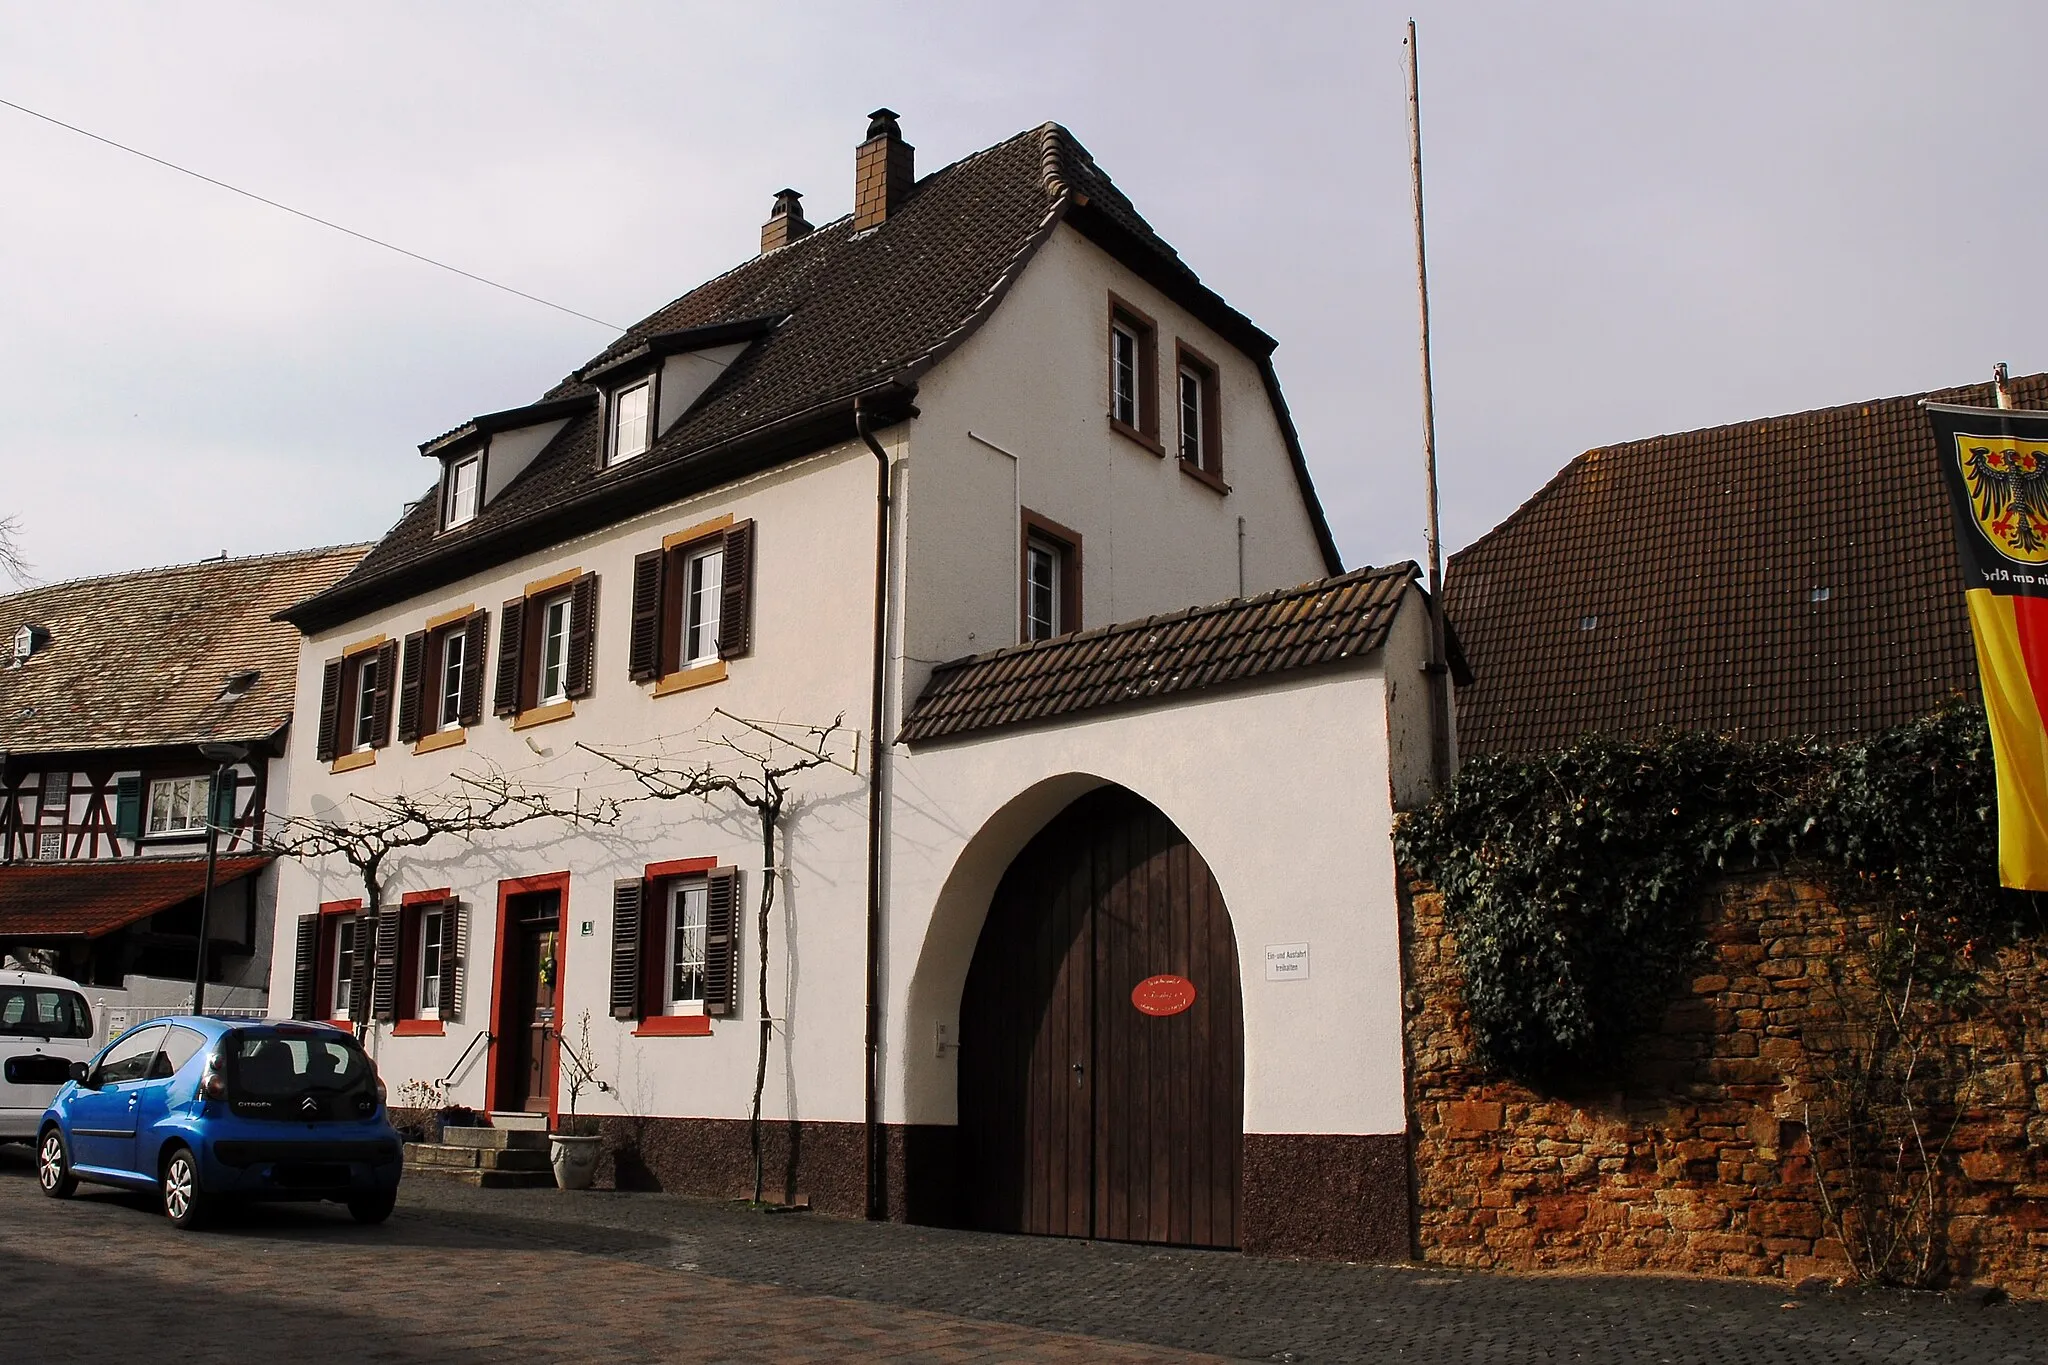 Photo showing: Courtyard in Nierstein, Fronhof 1, probably late medieval courtyard; Baroque House with hipped roof, second half of the 18th century, with older parts